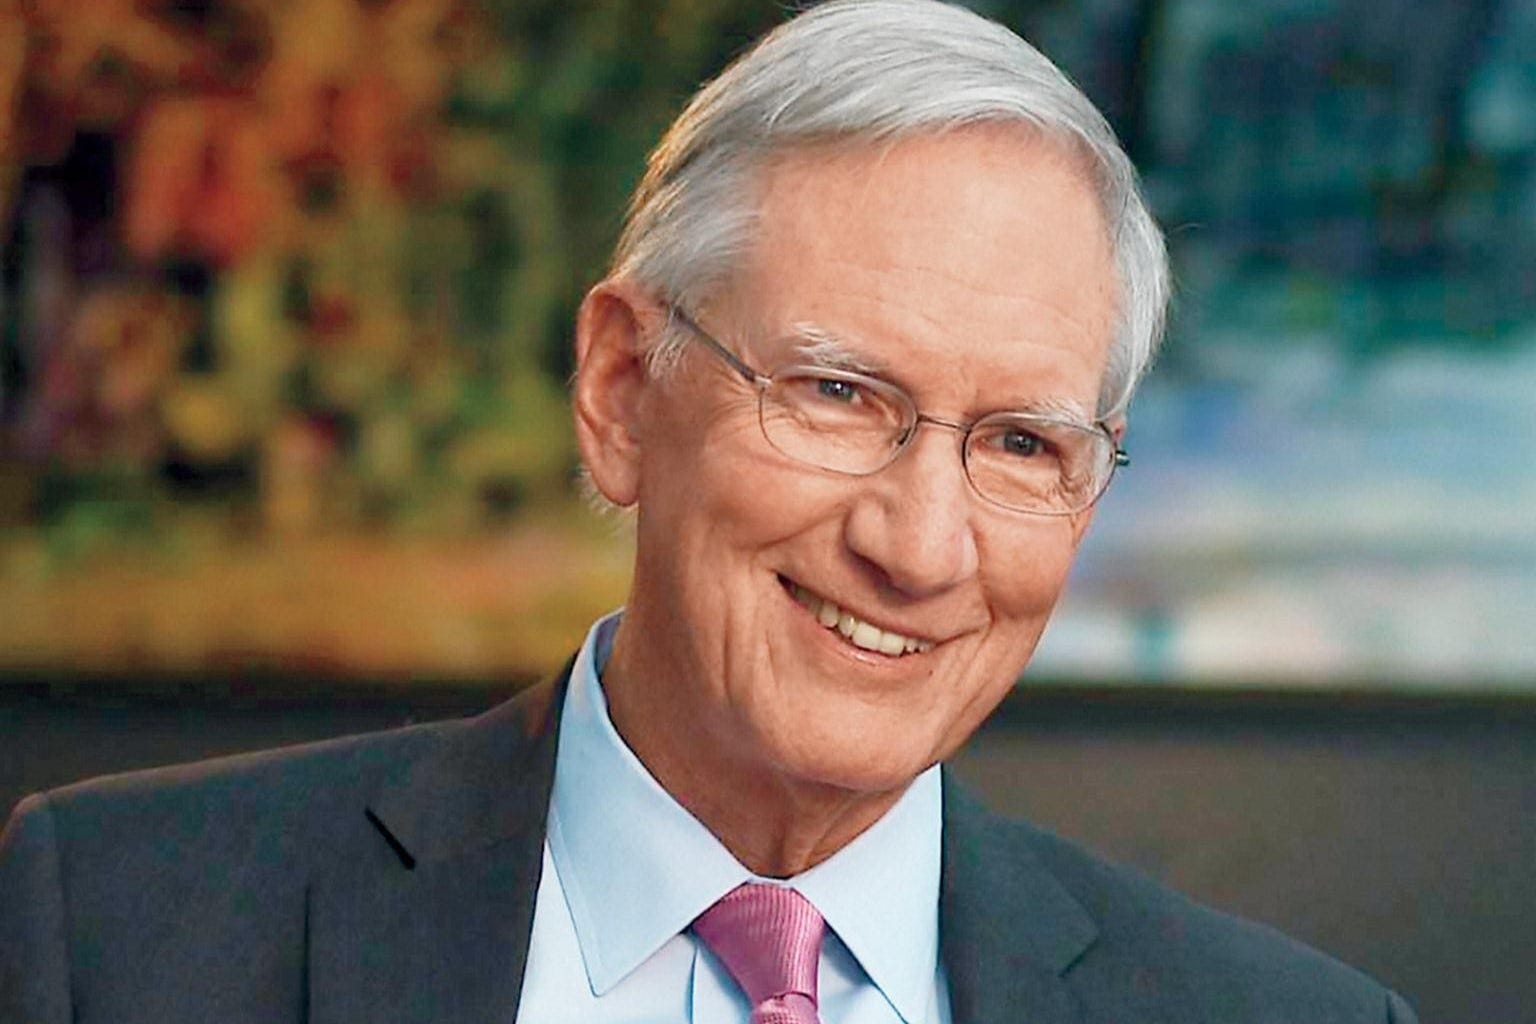 Episode 48: Tom Peters’ Compact Guide to Excellence